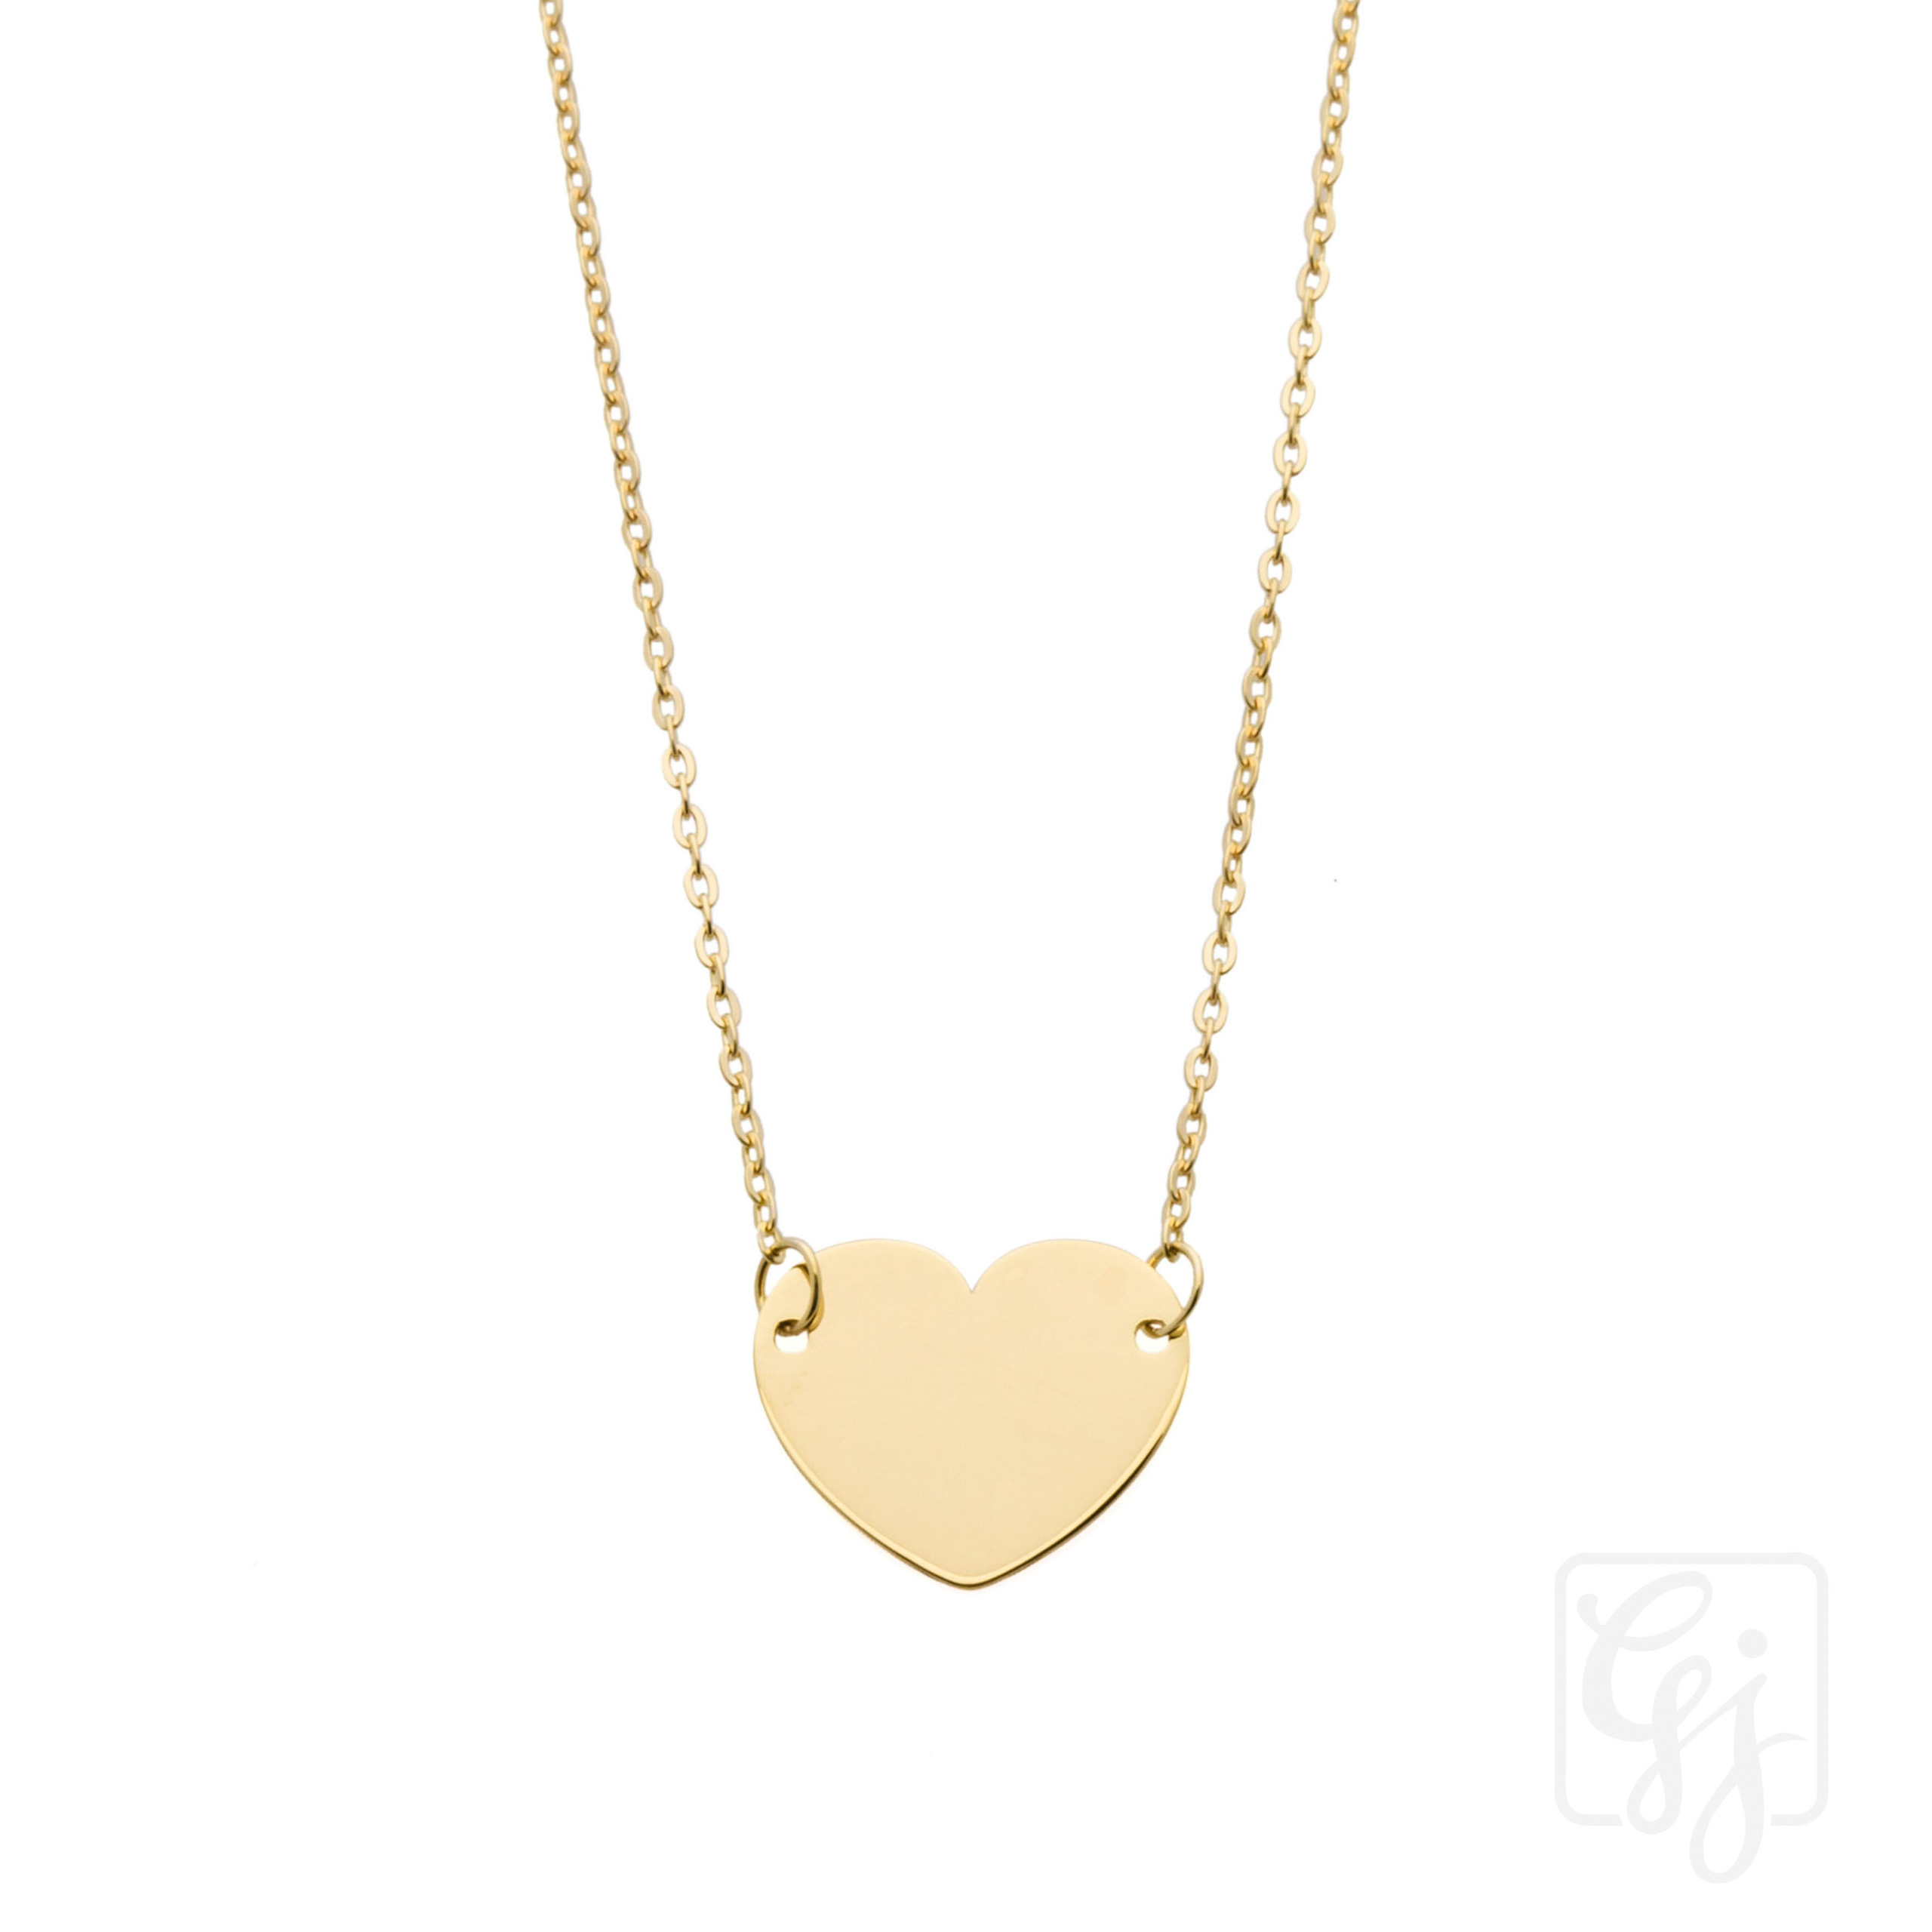 9K Yellow Gold Heart Necklace With 9K Gold Chain